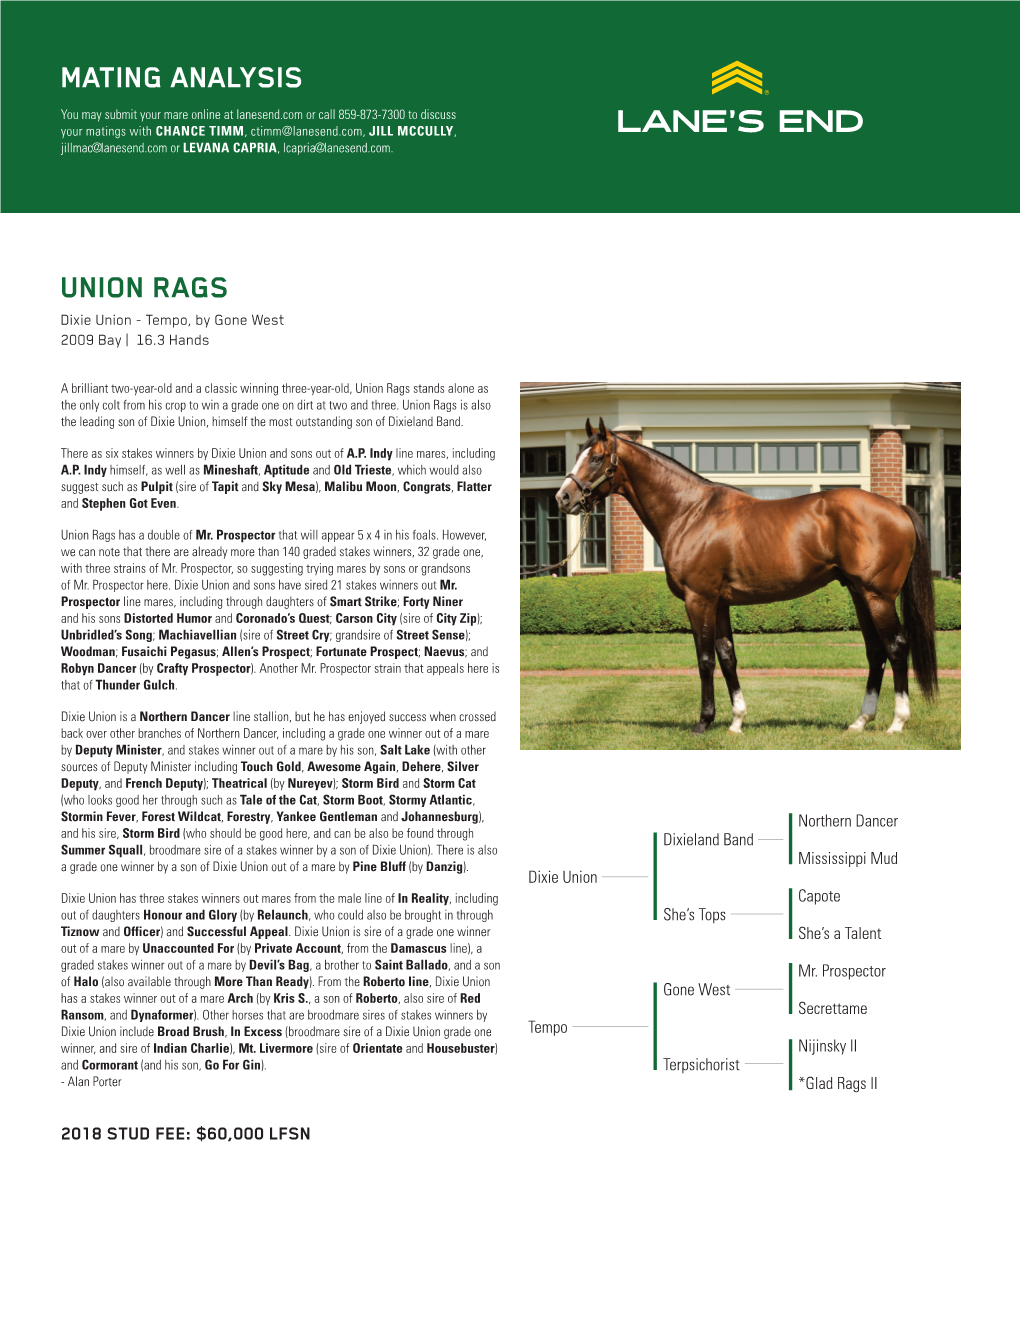 Mating Analysis Union Rags